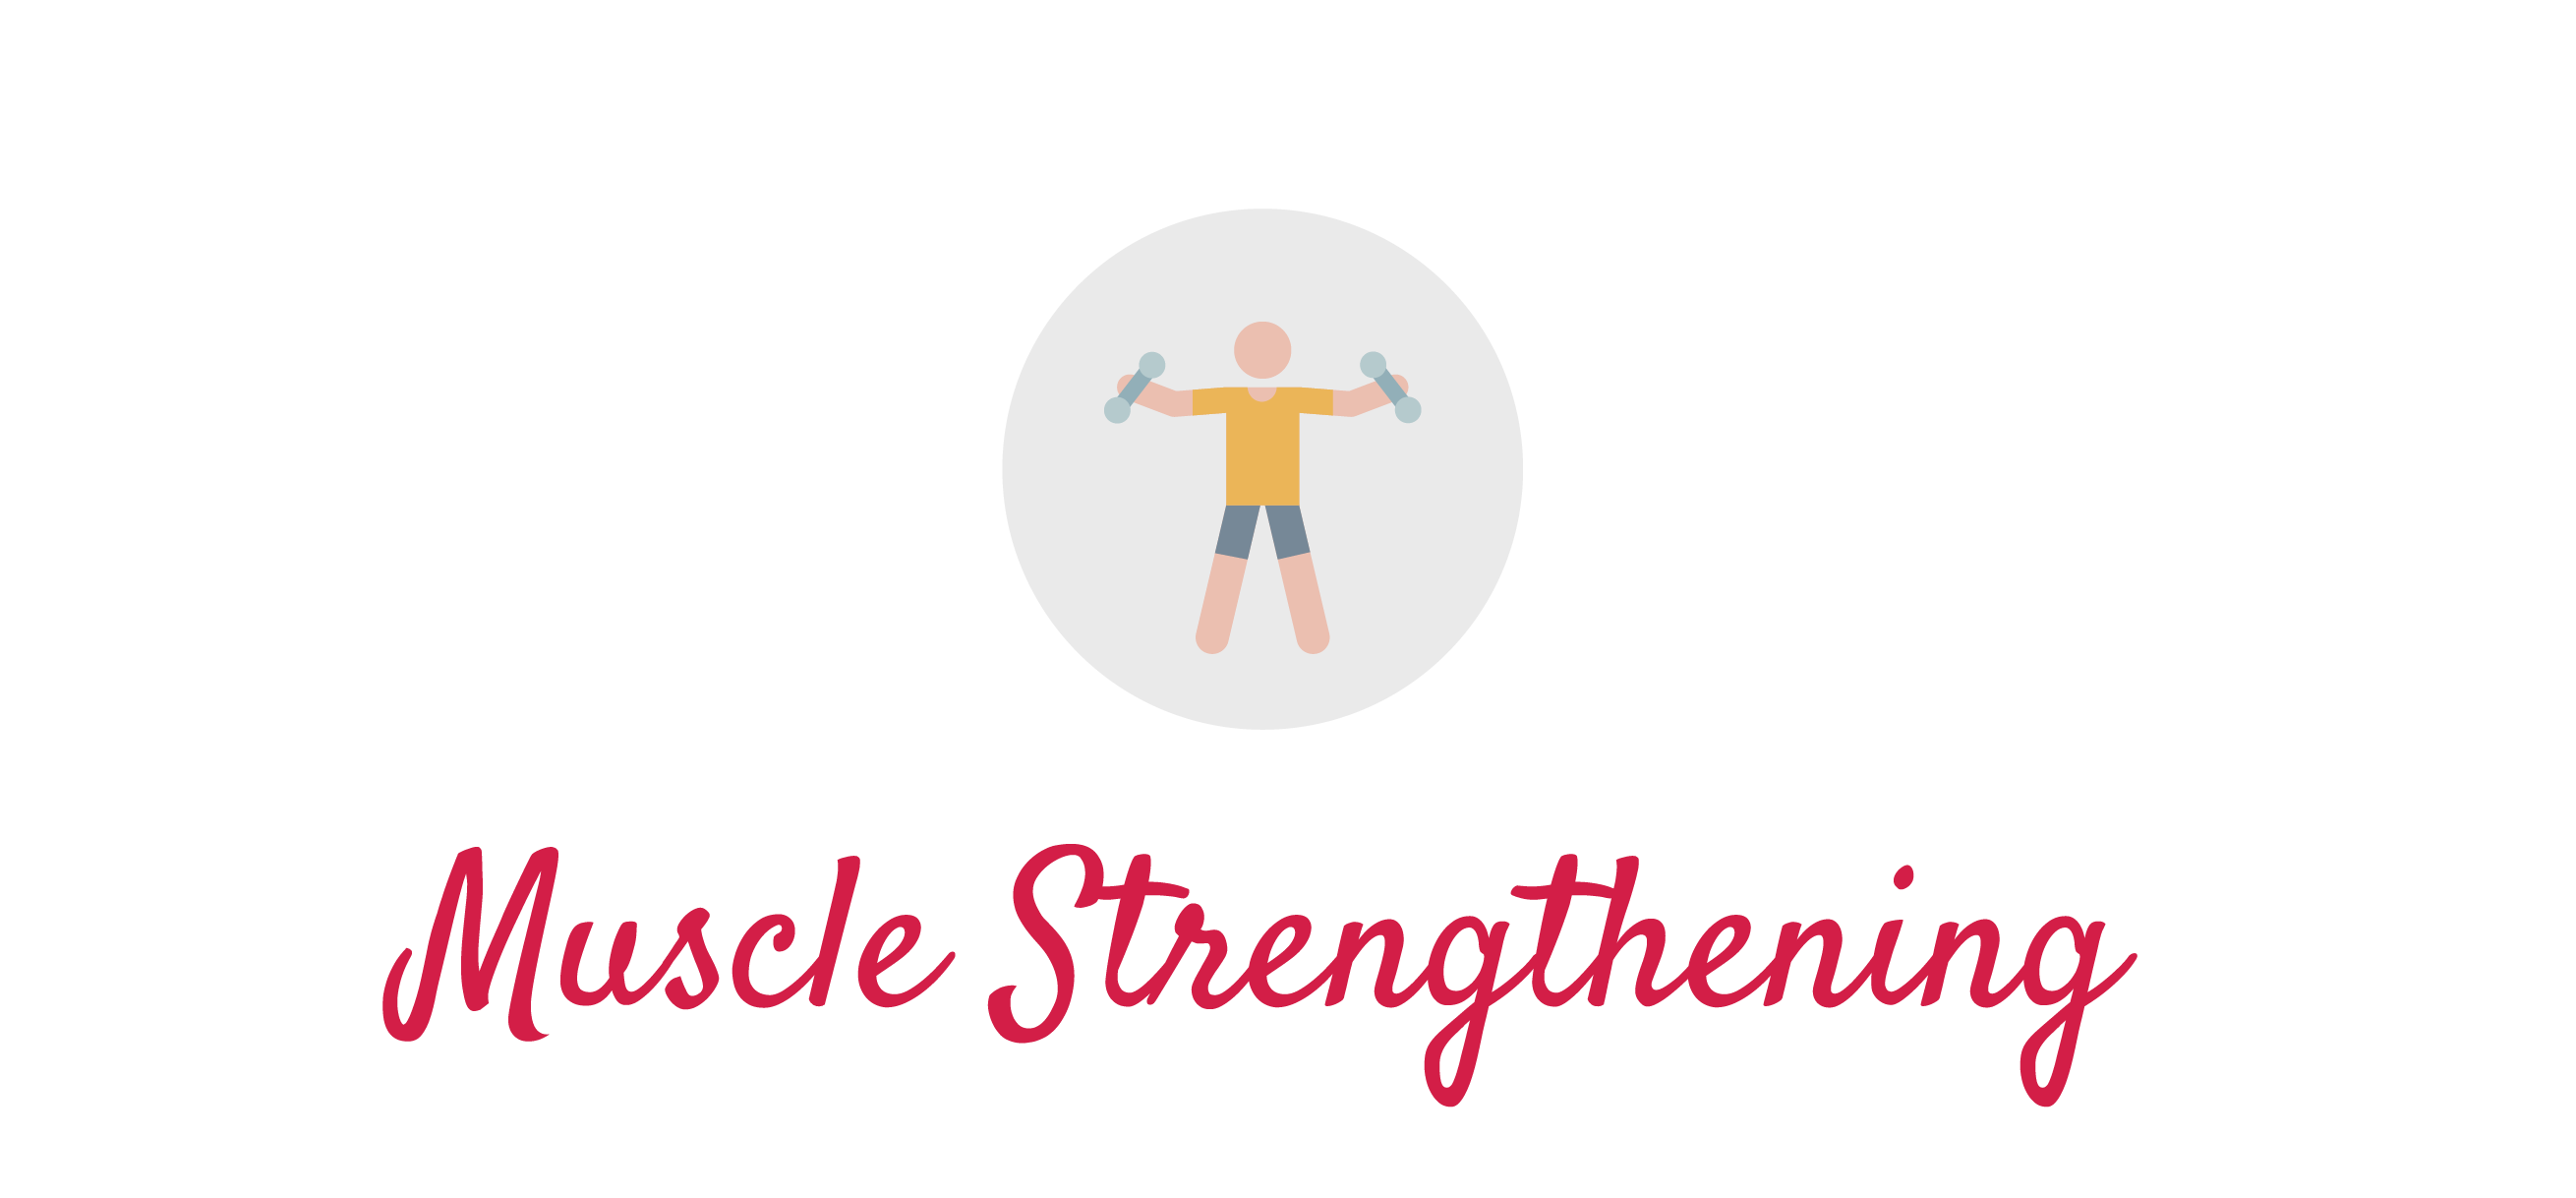 Muscle strengthening icon